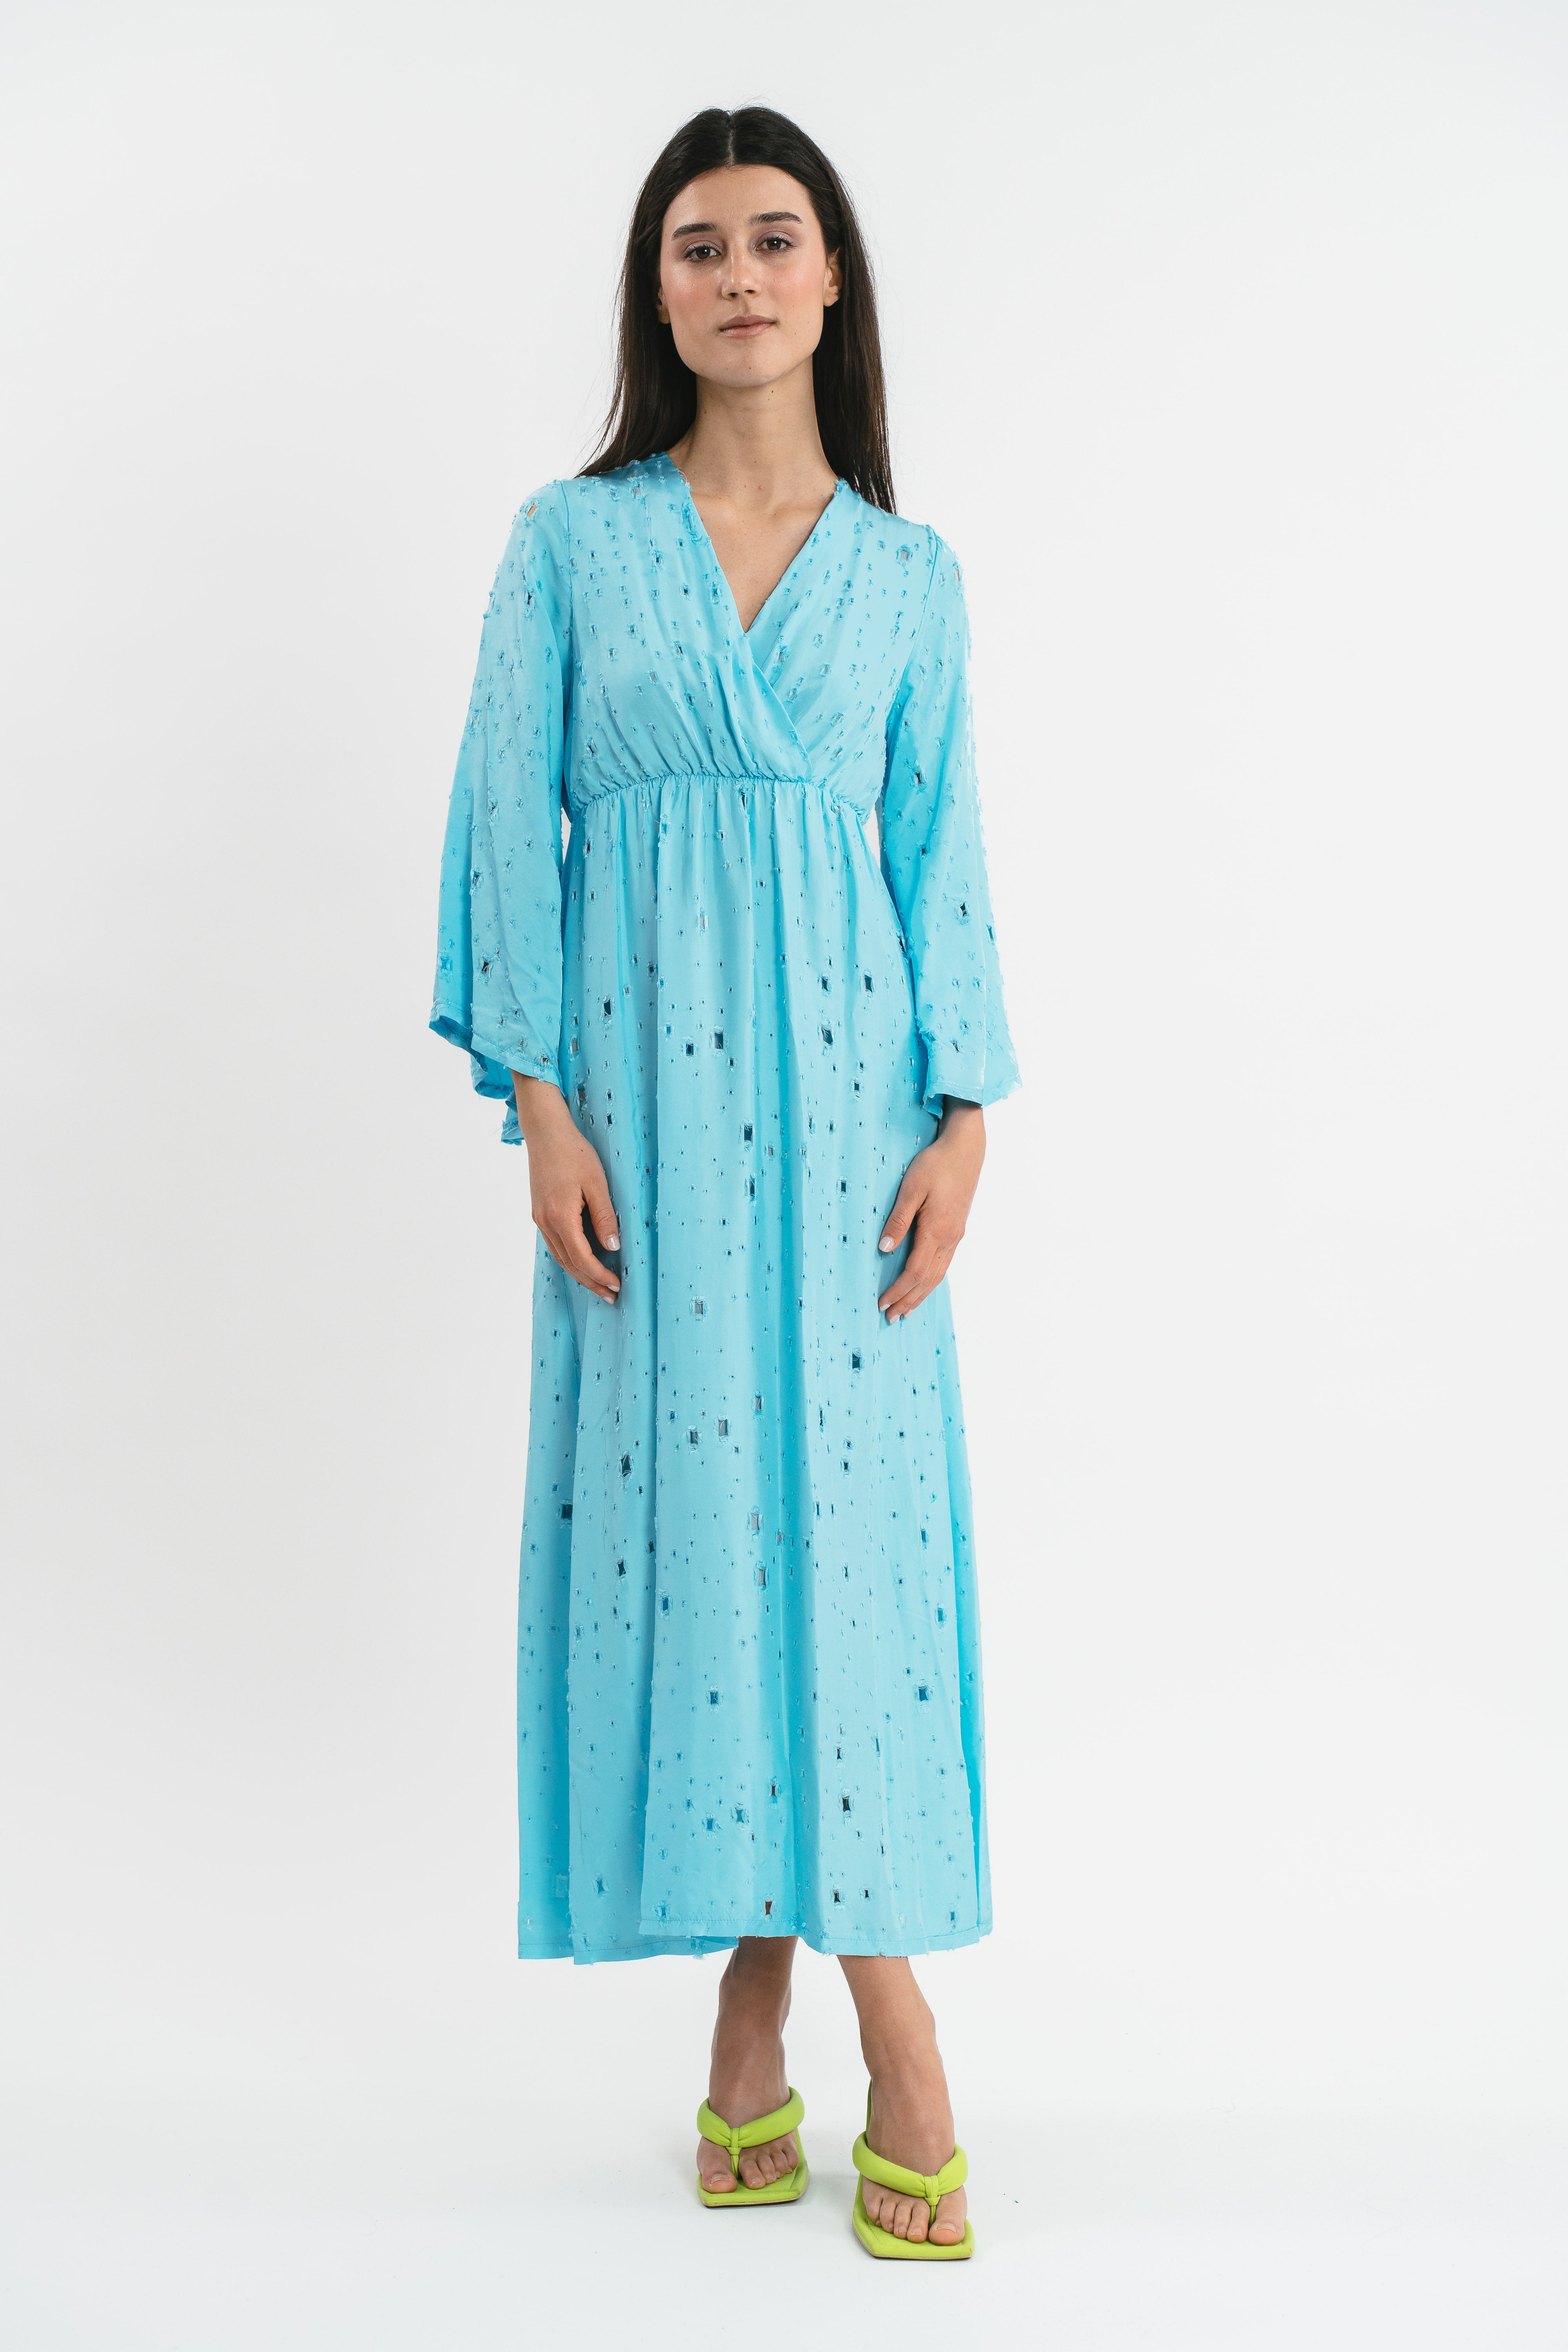 Openwork dress with wide sleeves